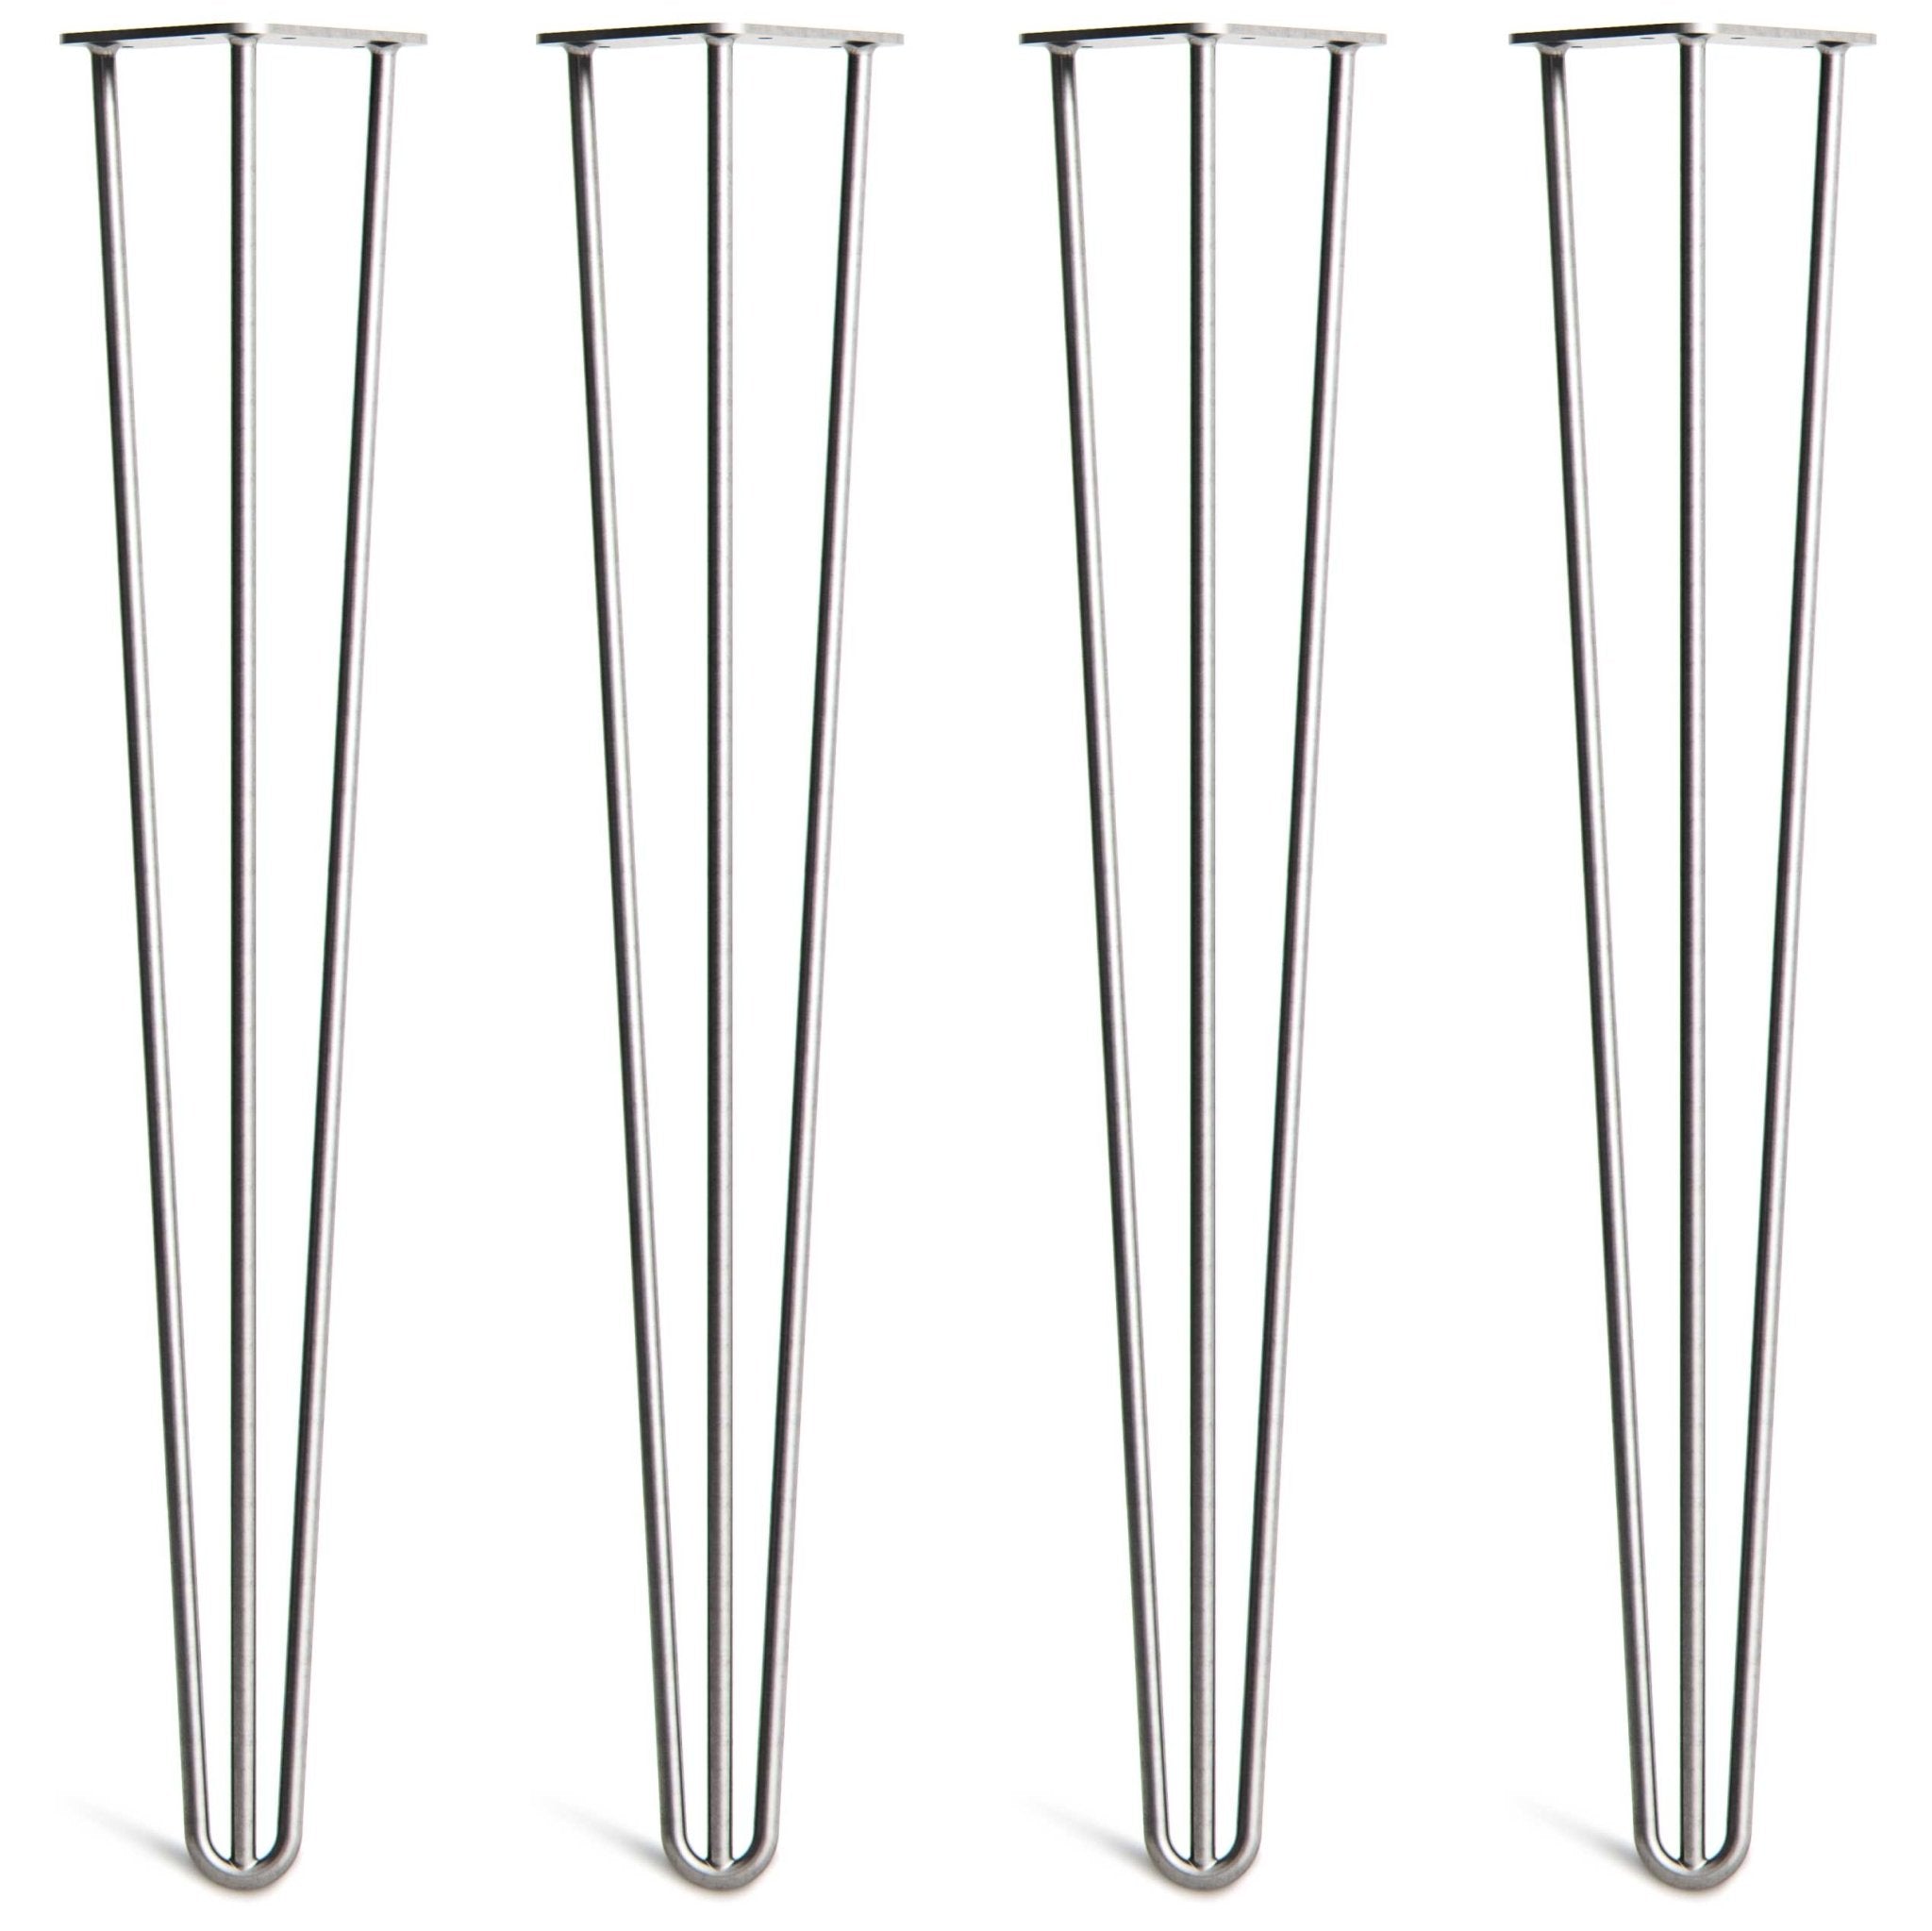 Raw Steel Hairpin Legs-28" / 71cm - Desk & Dining Table-3 Rod-The Hairpin Leg Co.